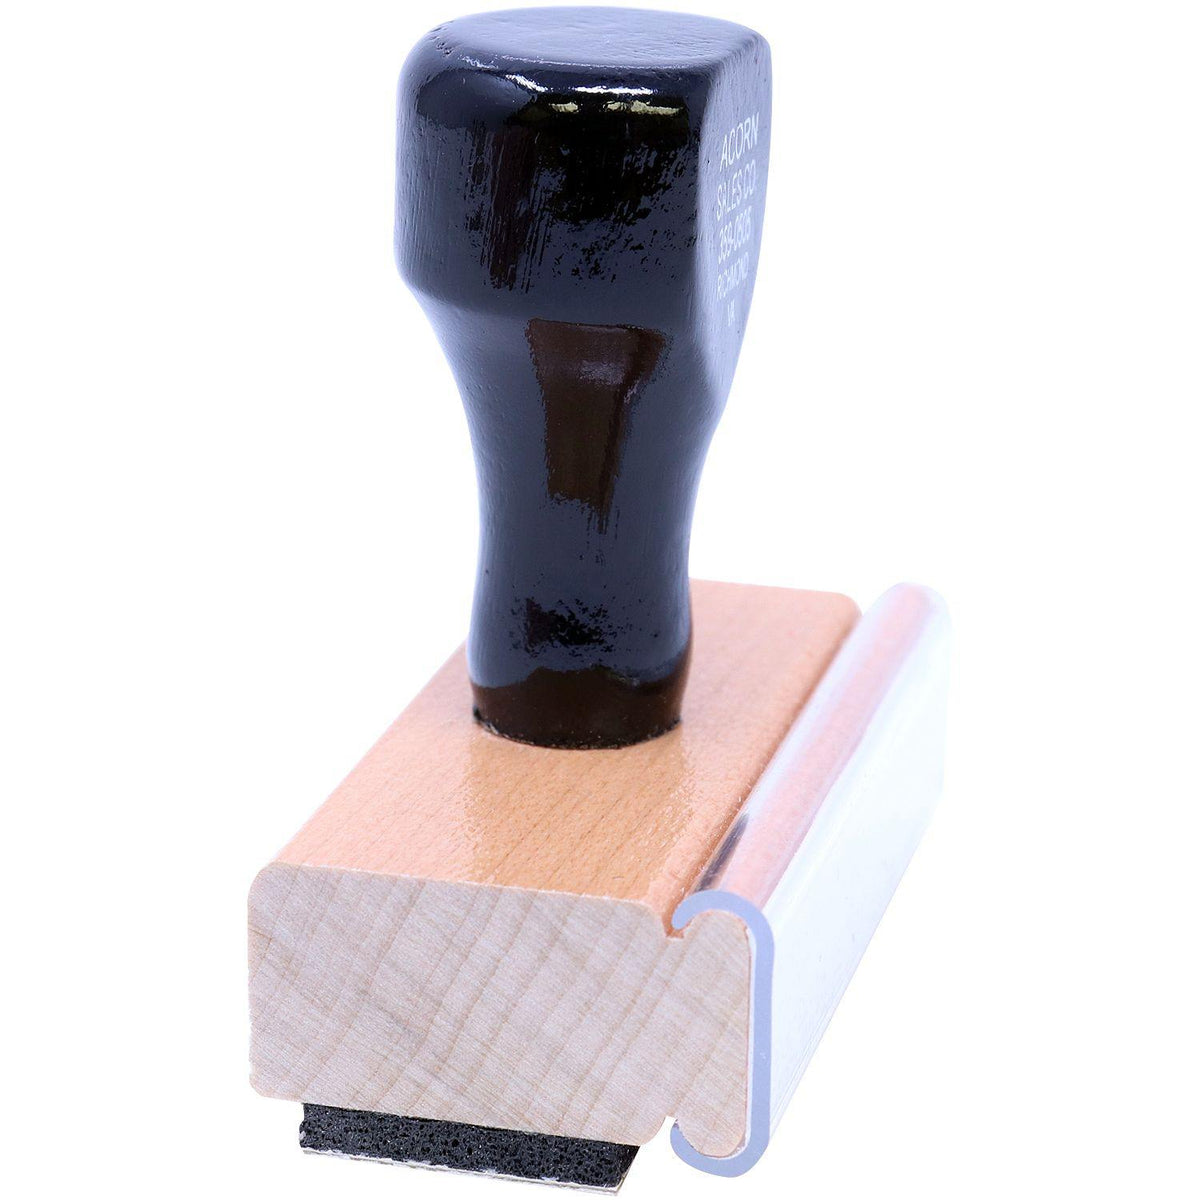 Side View of Large E Mailed Rubber Stamp at an Angle